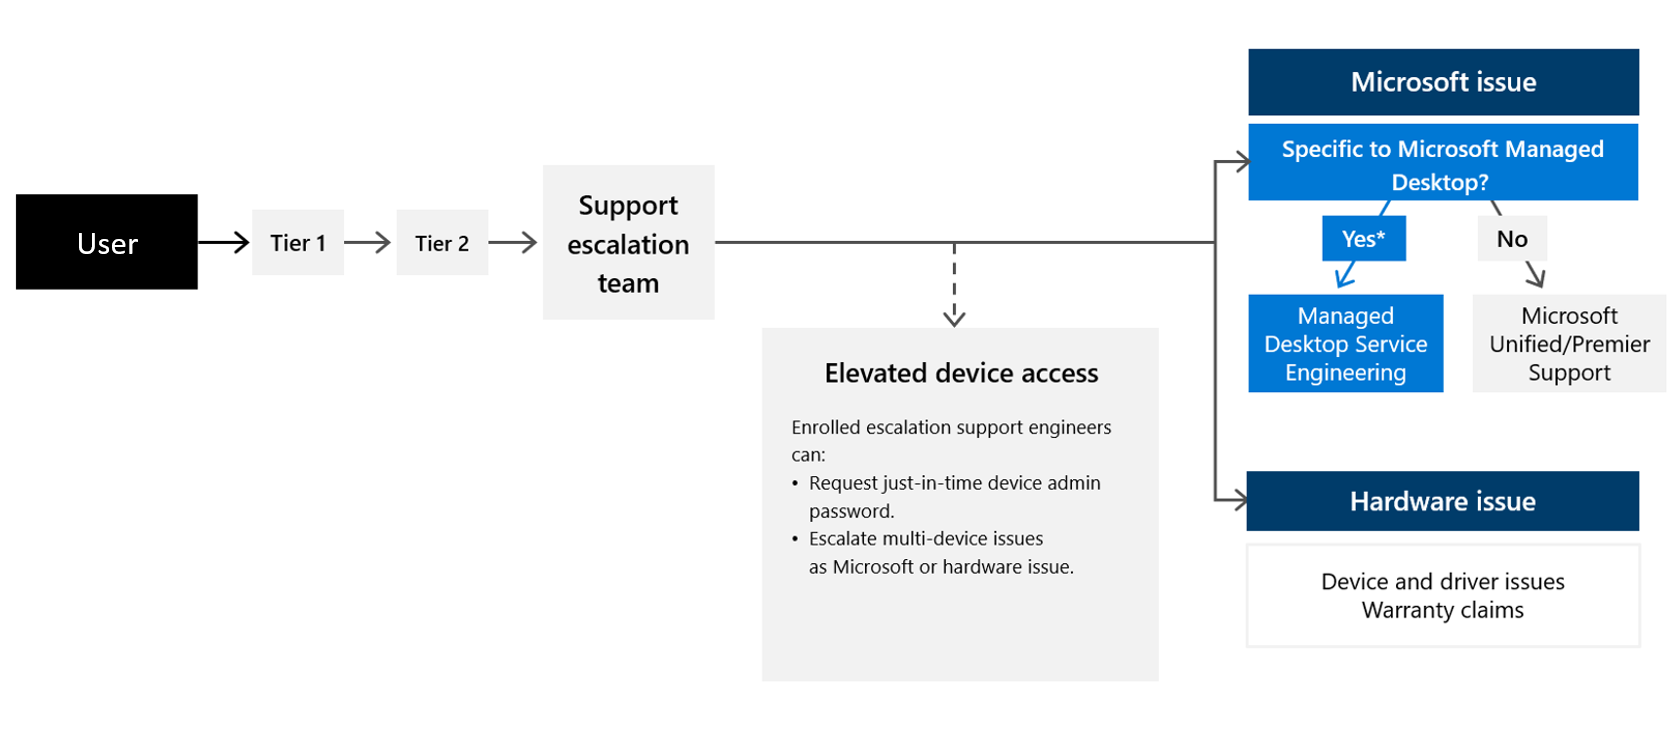 When a user contacts support, they'll work through your tiered staff system as you've designed. It's important to designate a group of support staff that will be given the abilities for elevation and escalation, known as the support escalation team. For specific Microsoft Managed Desktop issues, they can escalate to our Operations team. Or for other Microsoft issues, they can route to your existing support channel, Unified or Premier. Hardware issues should always be routed to your established provider or supplier